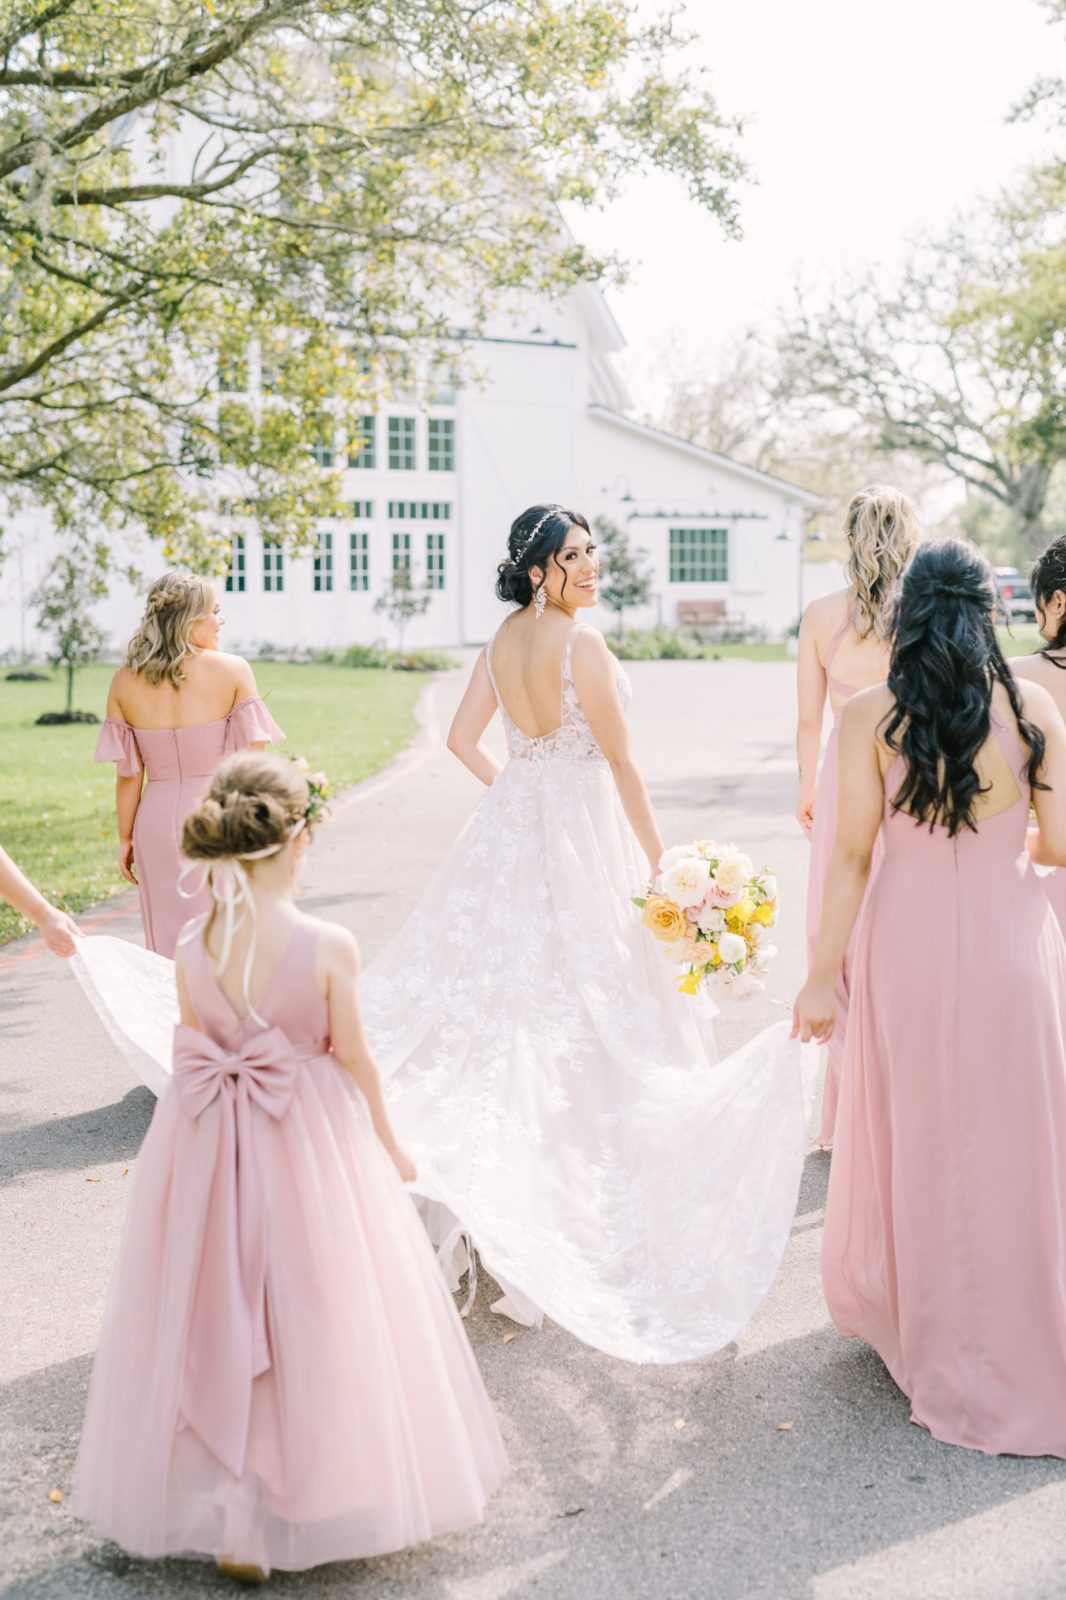 Surrounded by bridesmaids a bride looks back over her shoulder while walking toward a white barn by Christina Elliott Photography. lace dress #ChristinaElliottPhotography #ChristinaElliottWeddings #Houstonwedding #TheSpringsVenue #EastHoustonwedding